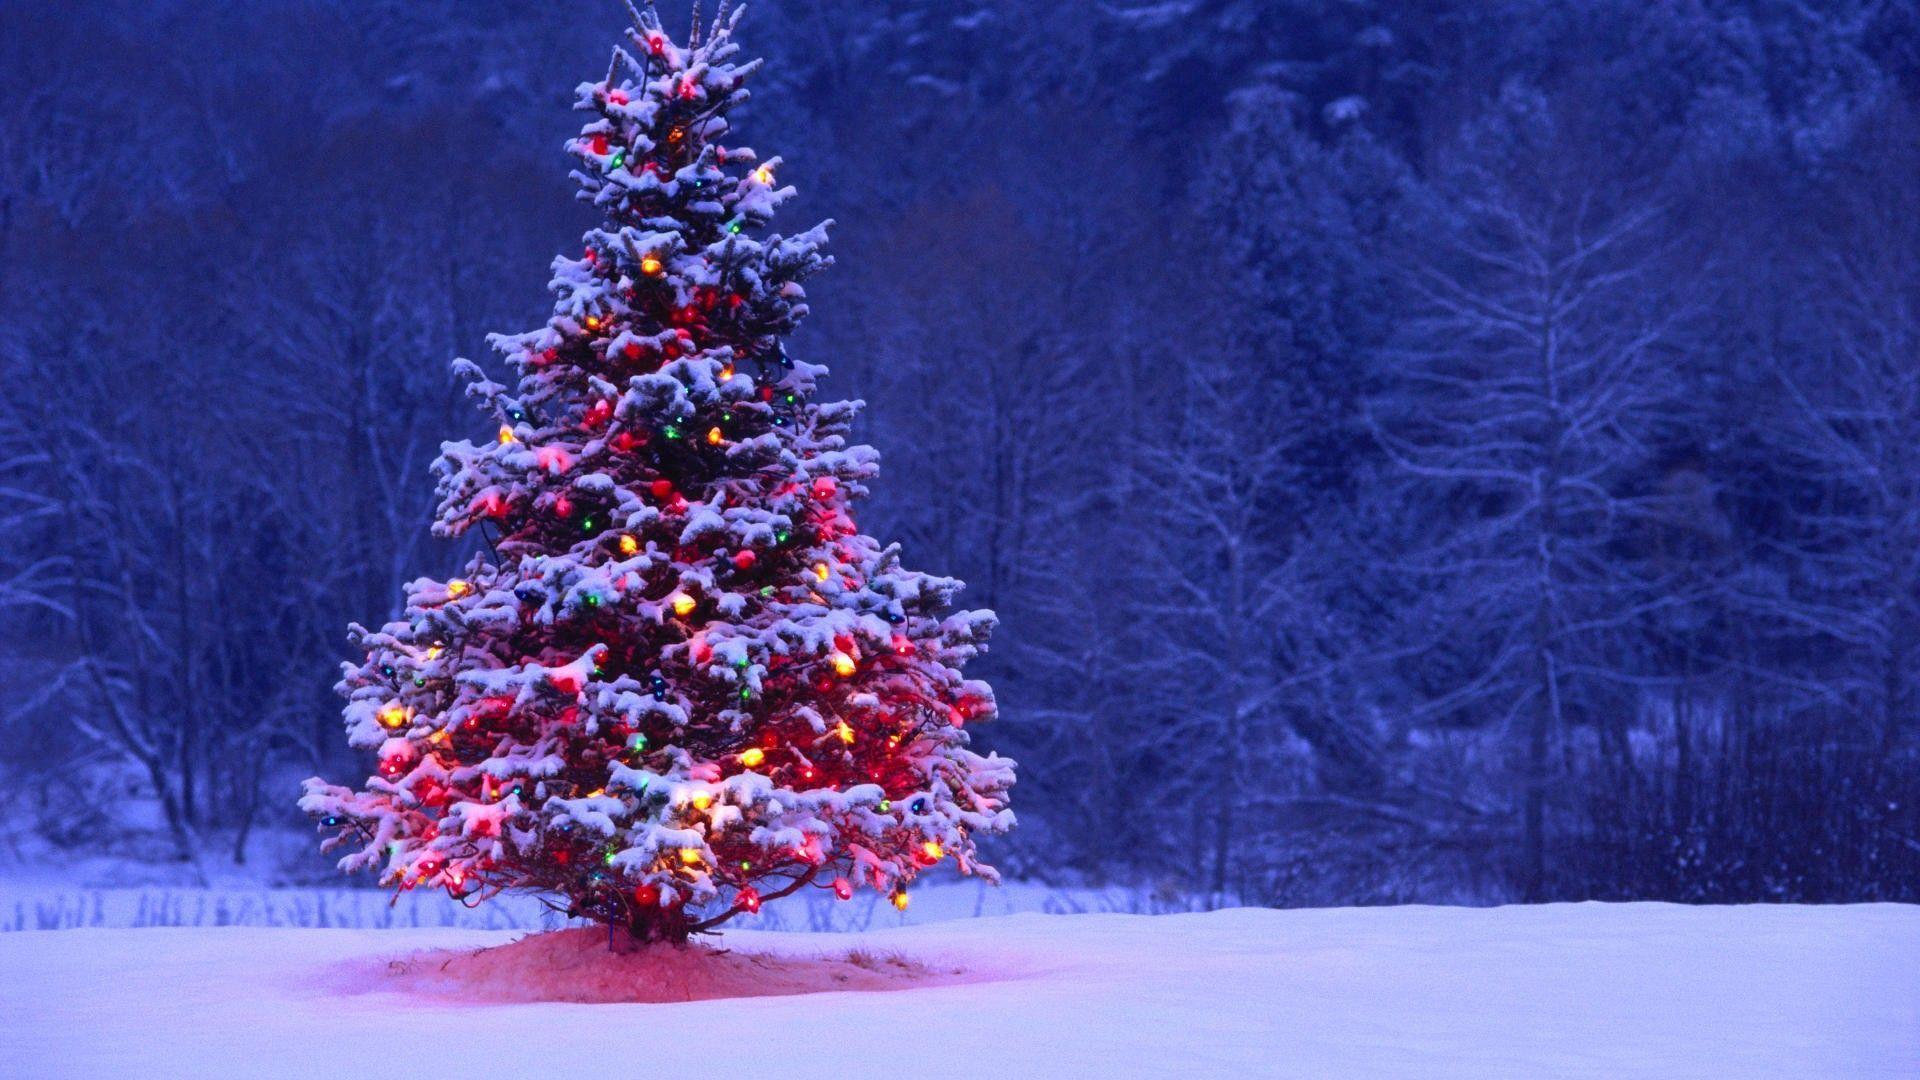 Snow Covered Christmas Tree Decoration HD Christmas Wallpapers  HD  Wallpapers  ID 53561